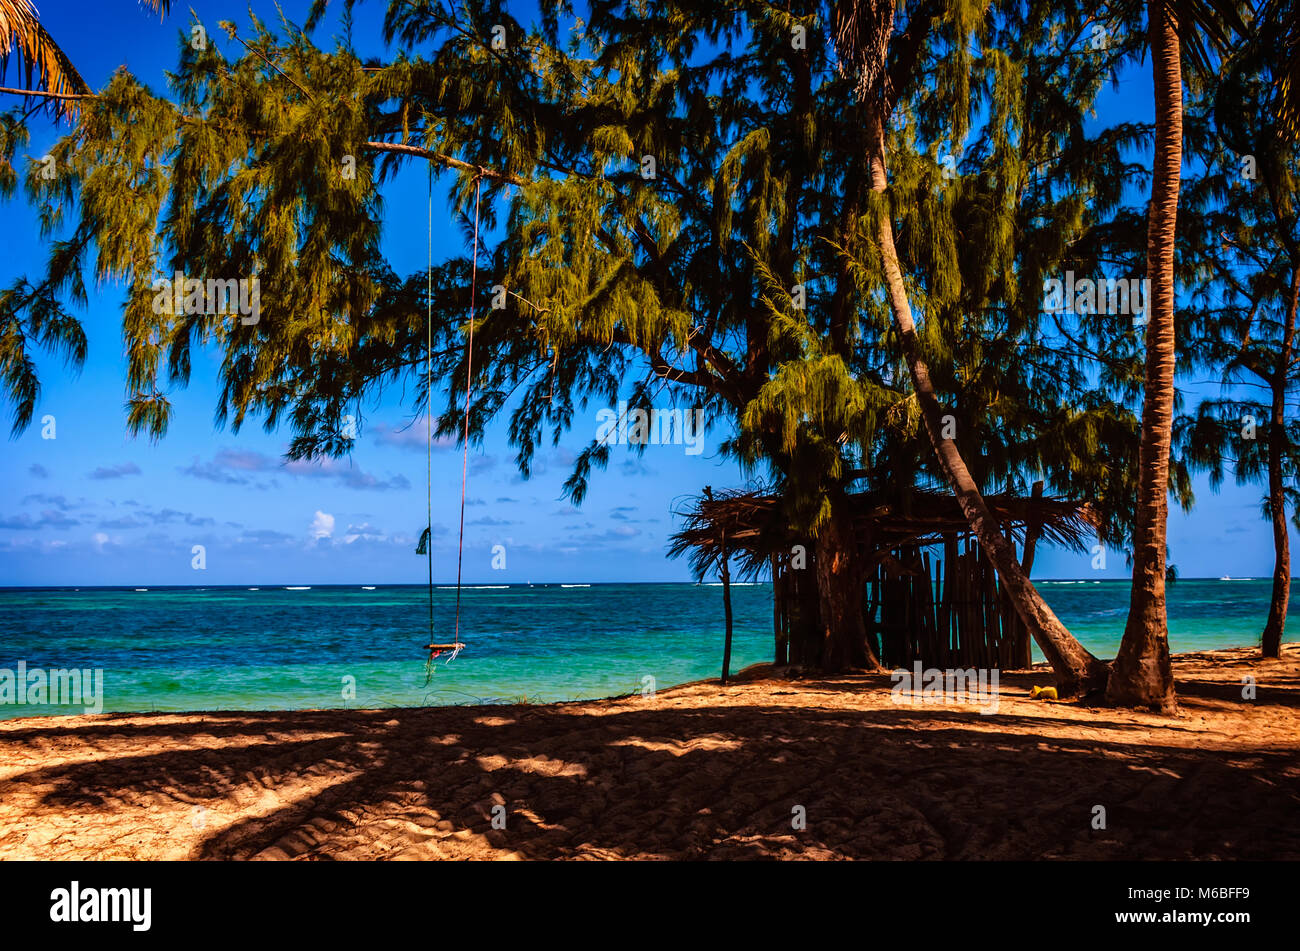 A wooden hut on the sand and a rope swing under the shade of trees and coconut palms on the shore of the blue ocean with white waves, sky and clouds o Stock Photo